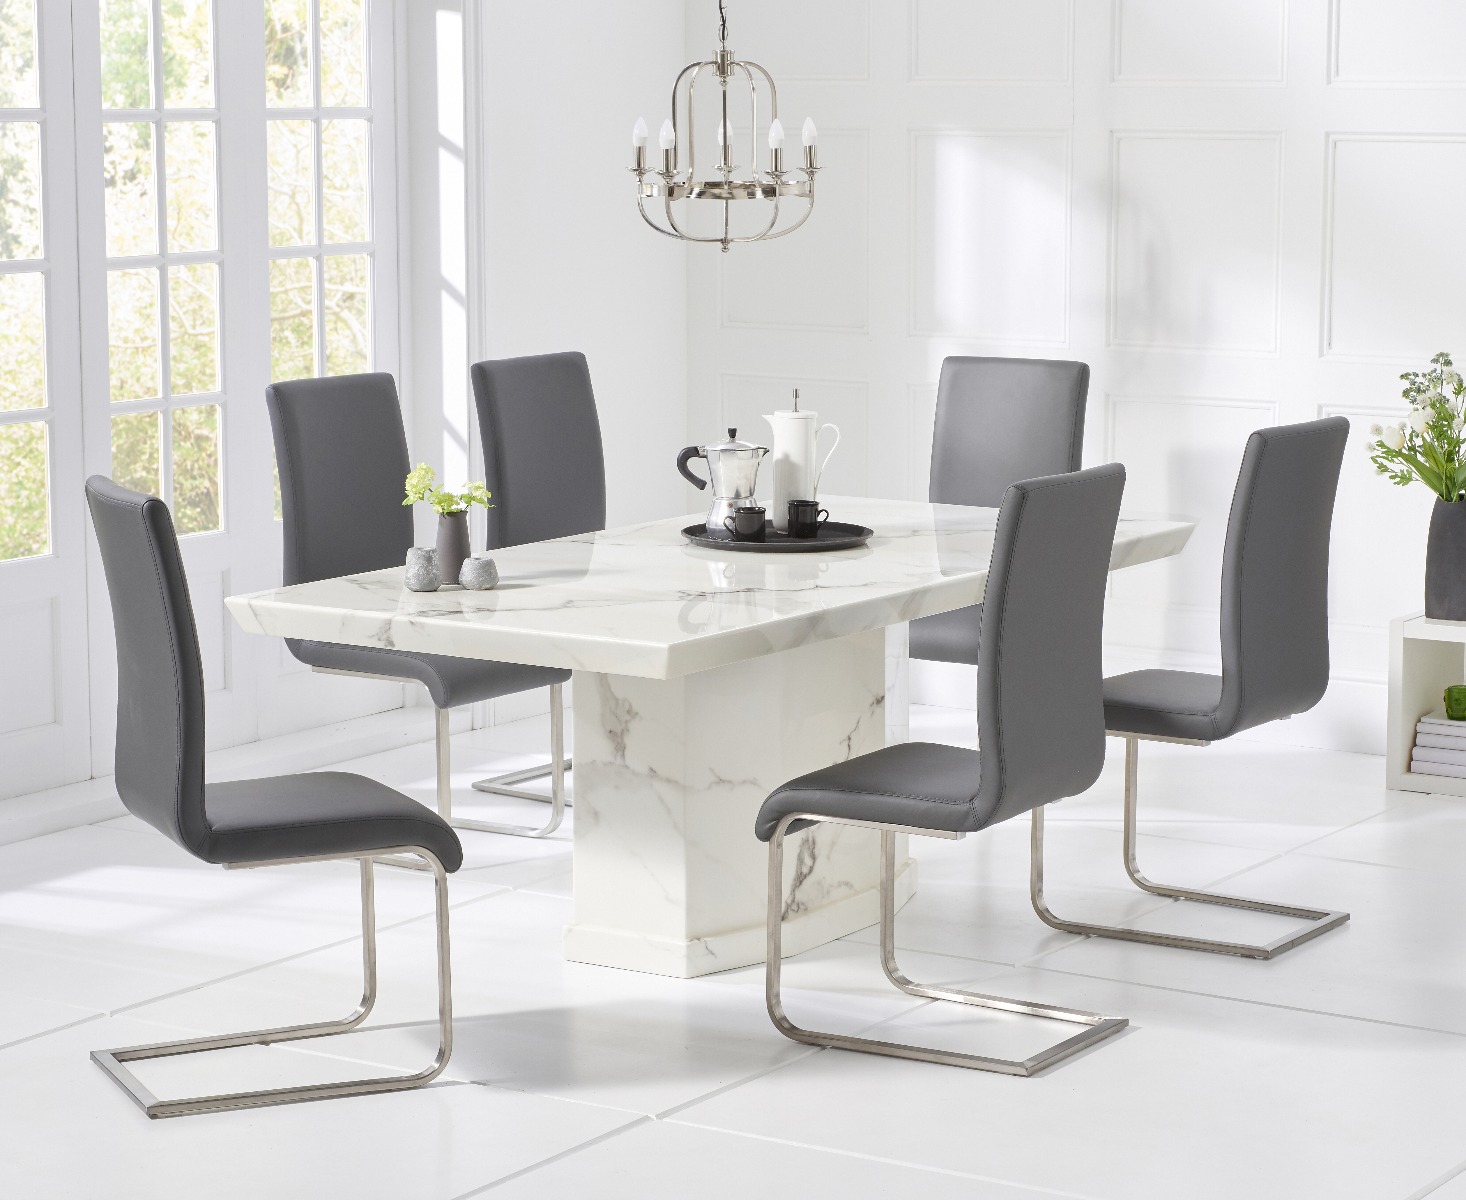 Carvelle 200cm White Pedestal Marble Dining Table With 10 White Malaga Chairs